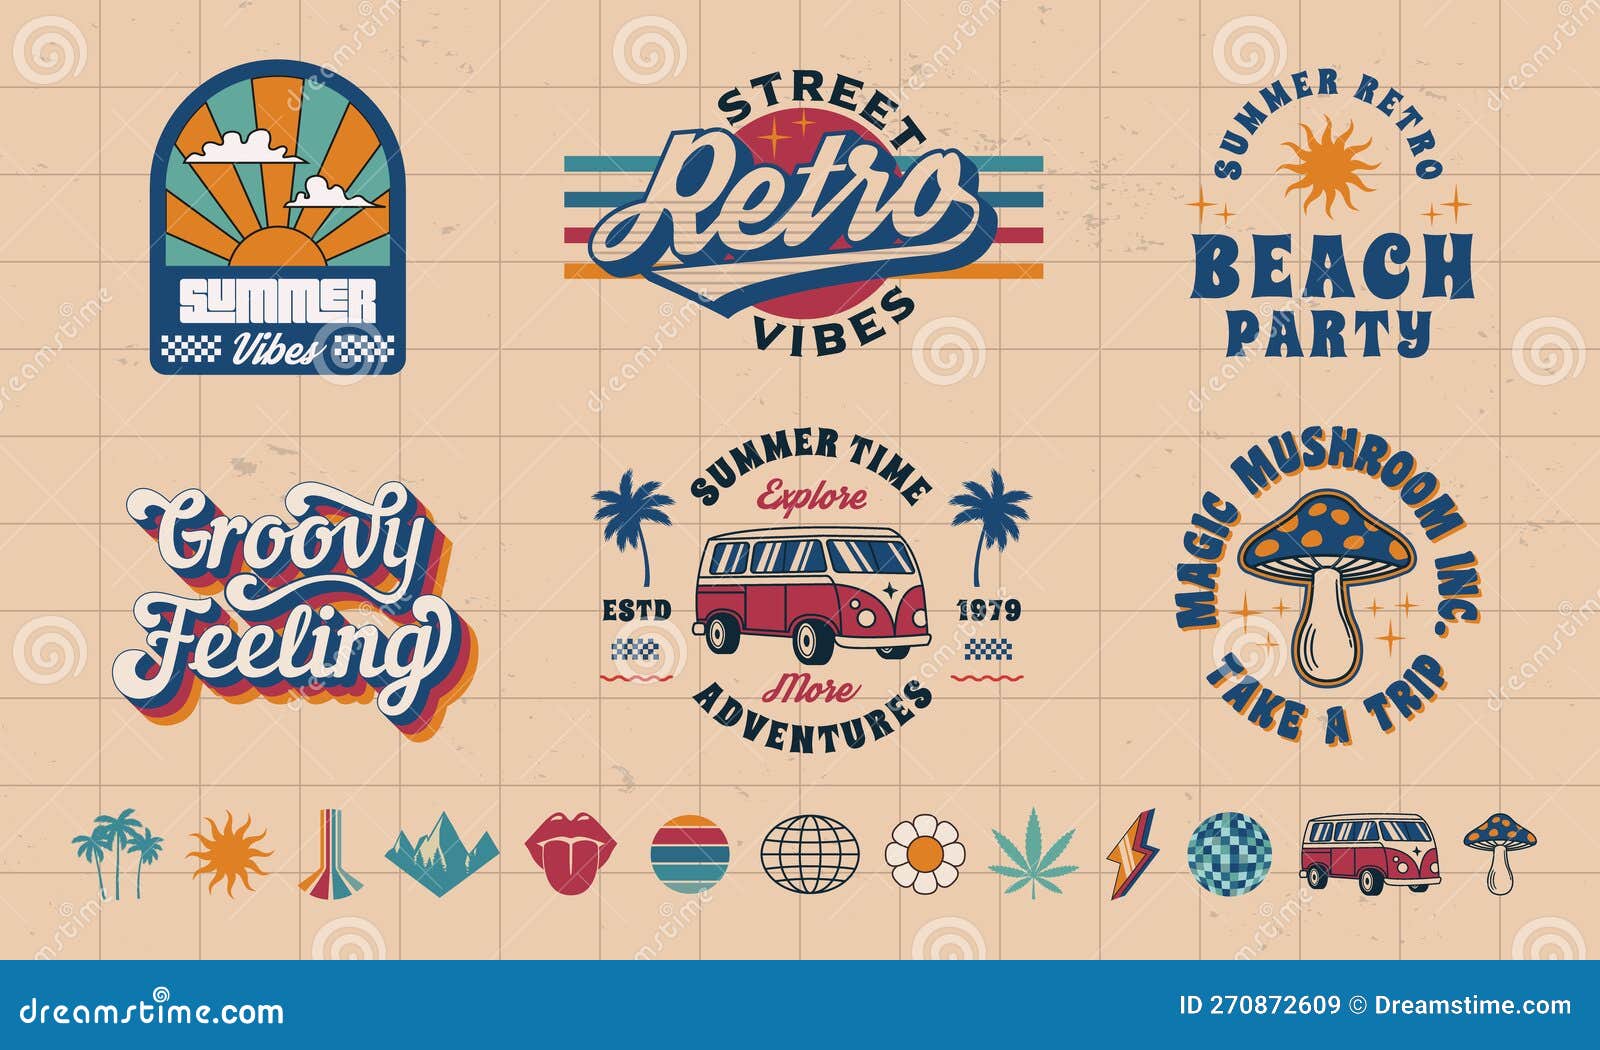 6 Retro Groovy Logo Templates and 13 Trendy Elements To Create Your Own ...